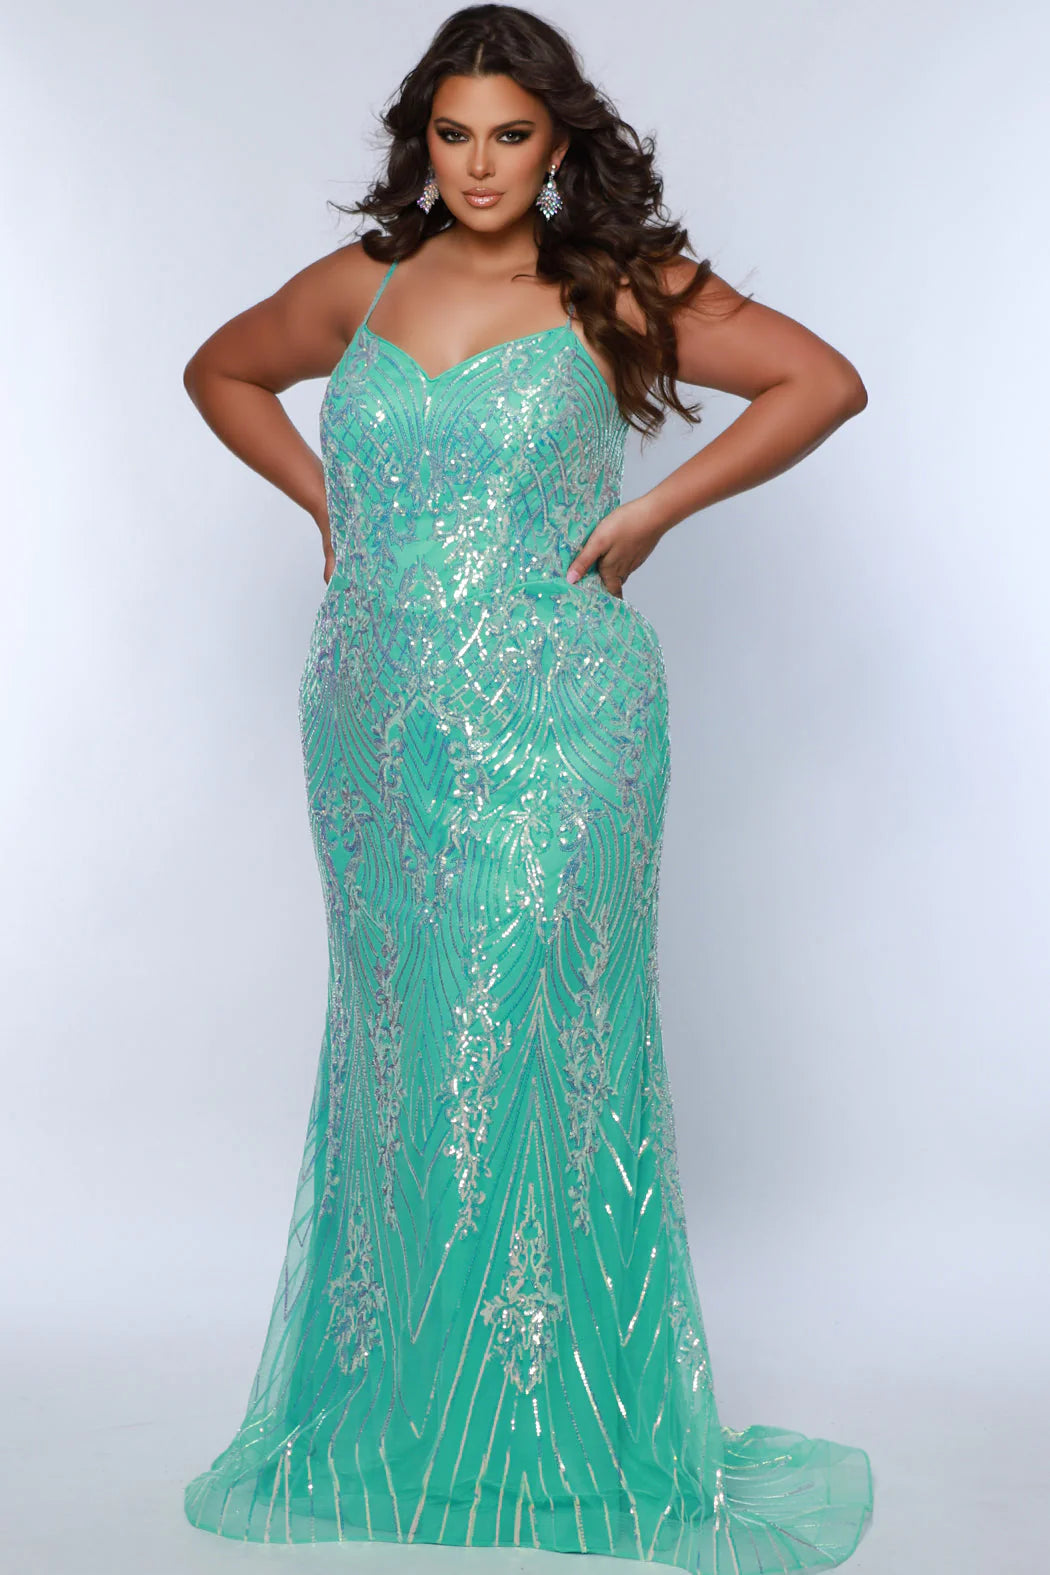 Look beautiful and timeless in this Sydneys Closet SC7366 Long Prom Dress. The fitted plus size gown is embellished with dazzling sequins and a graceful train. Perfect for your next formal event, this elegant dress is sure to make you the bright star of the night. Look glamorous on your big night in this sexy fitted Trumpet gown.